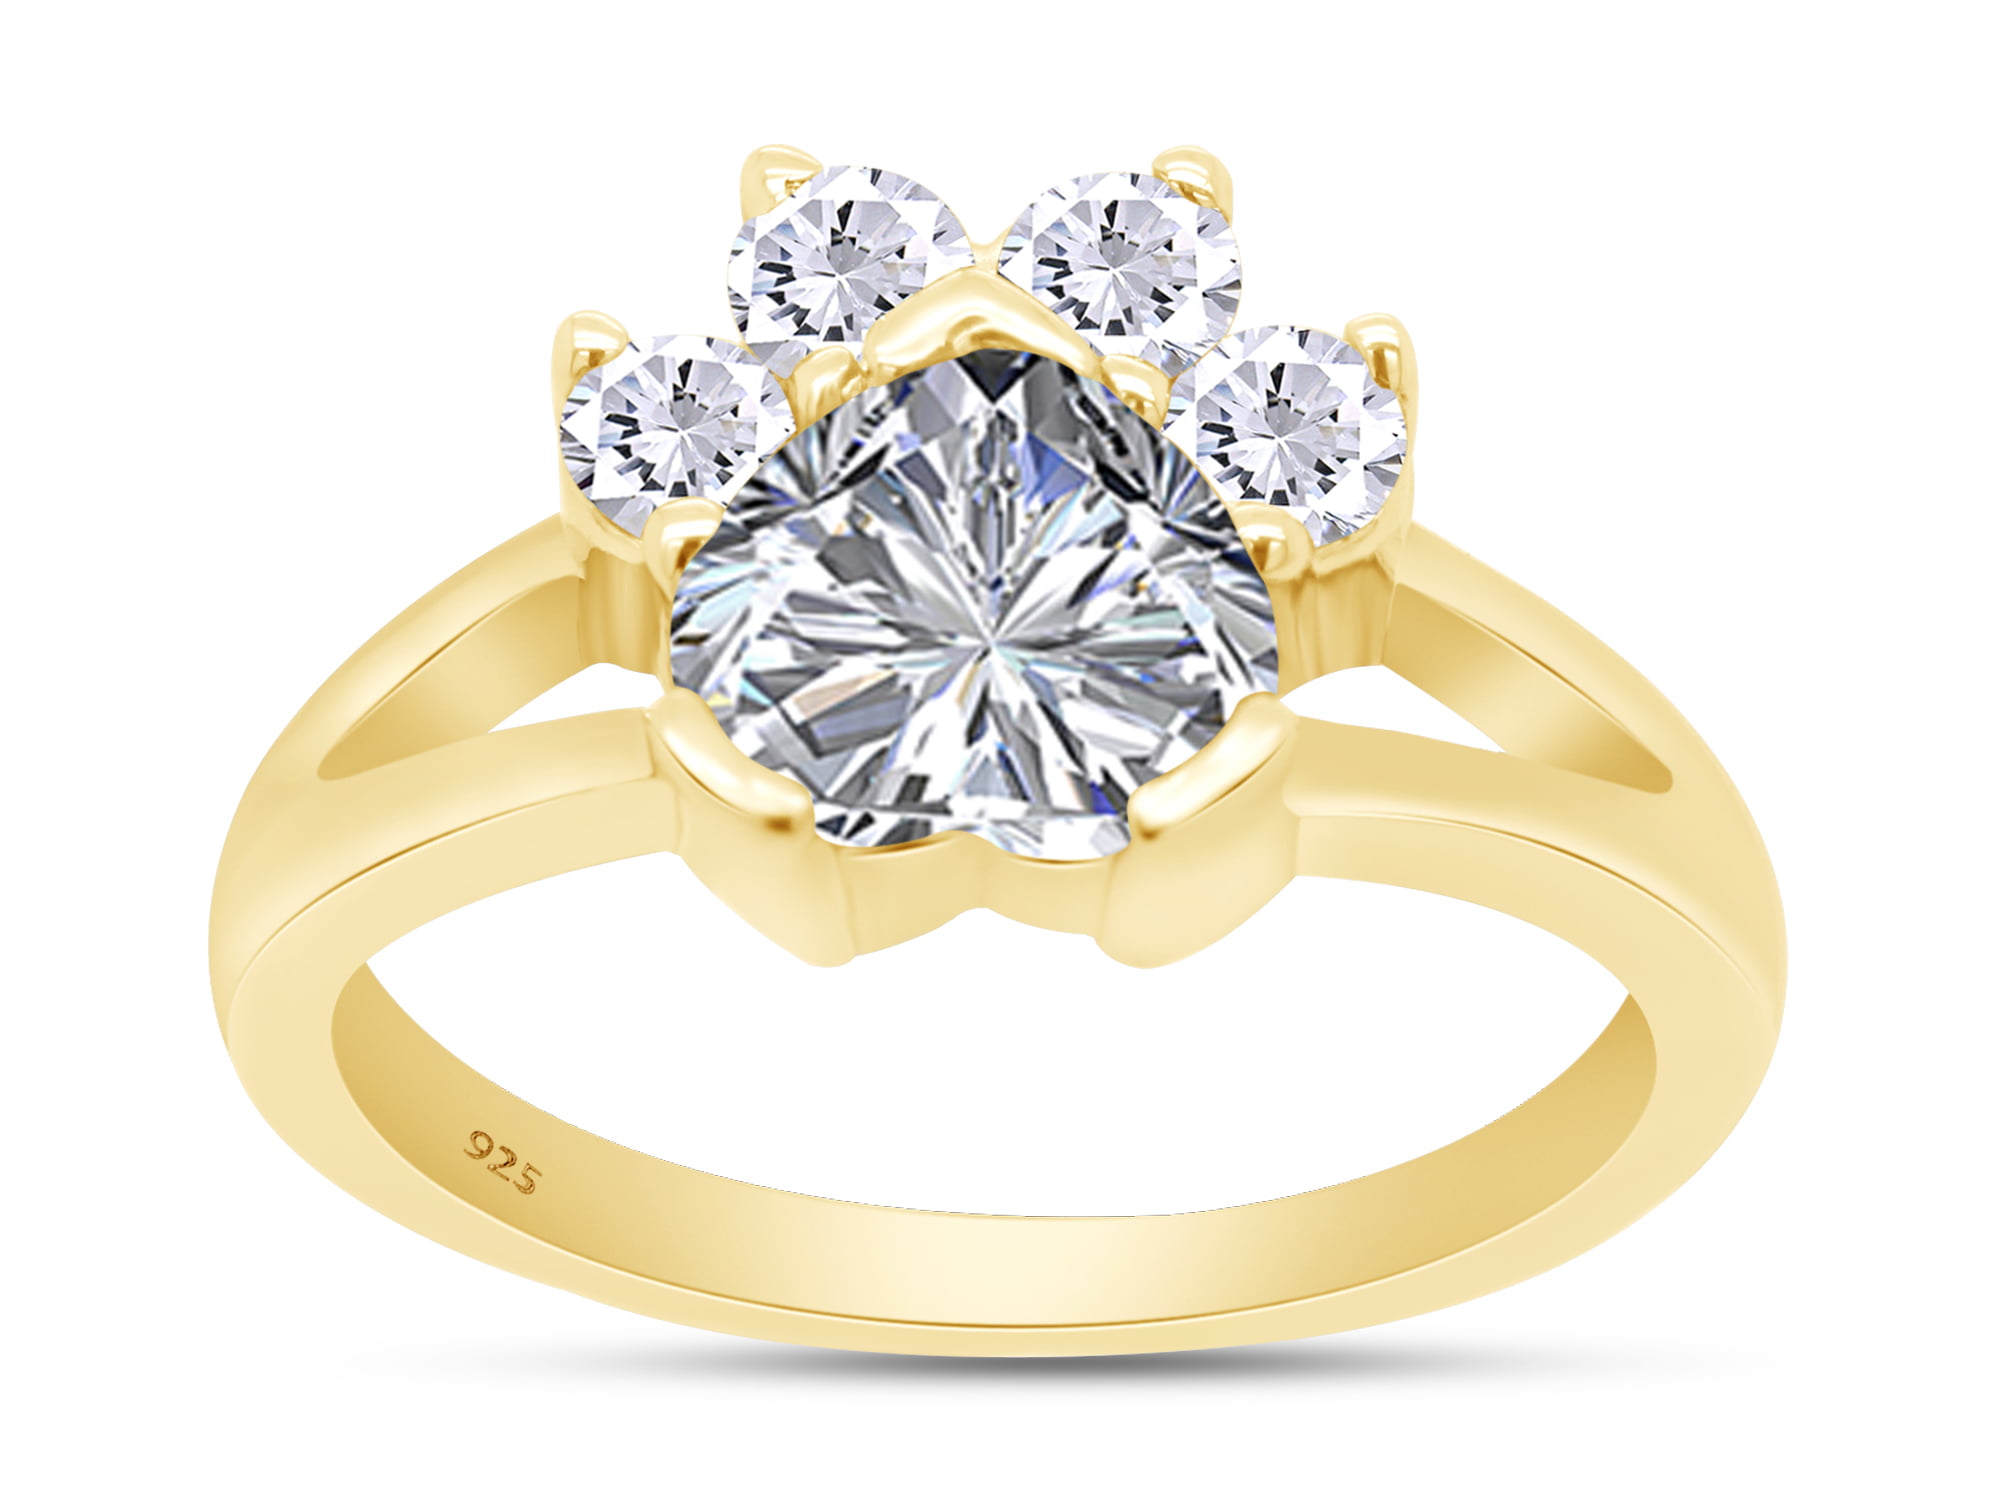 Wishrocks Round Cut White Cubic Zirconia Open Ring in 14K Gold Over Sterling Silver 